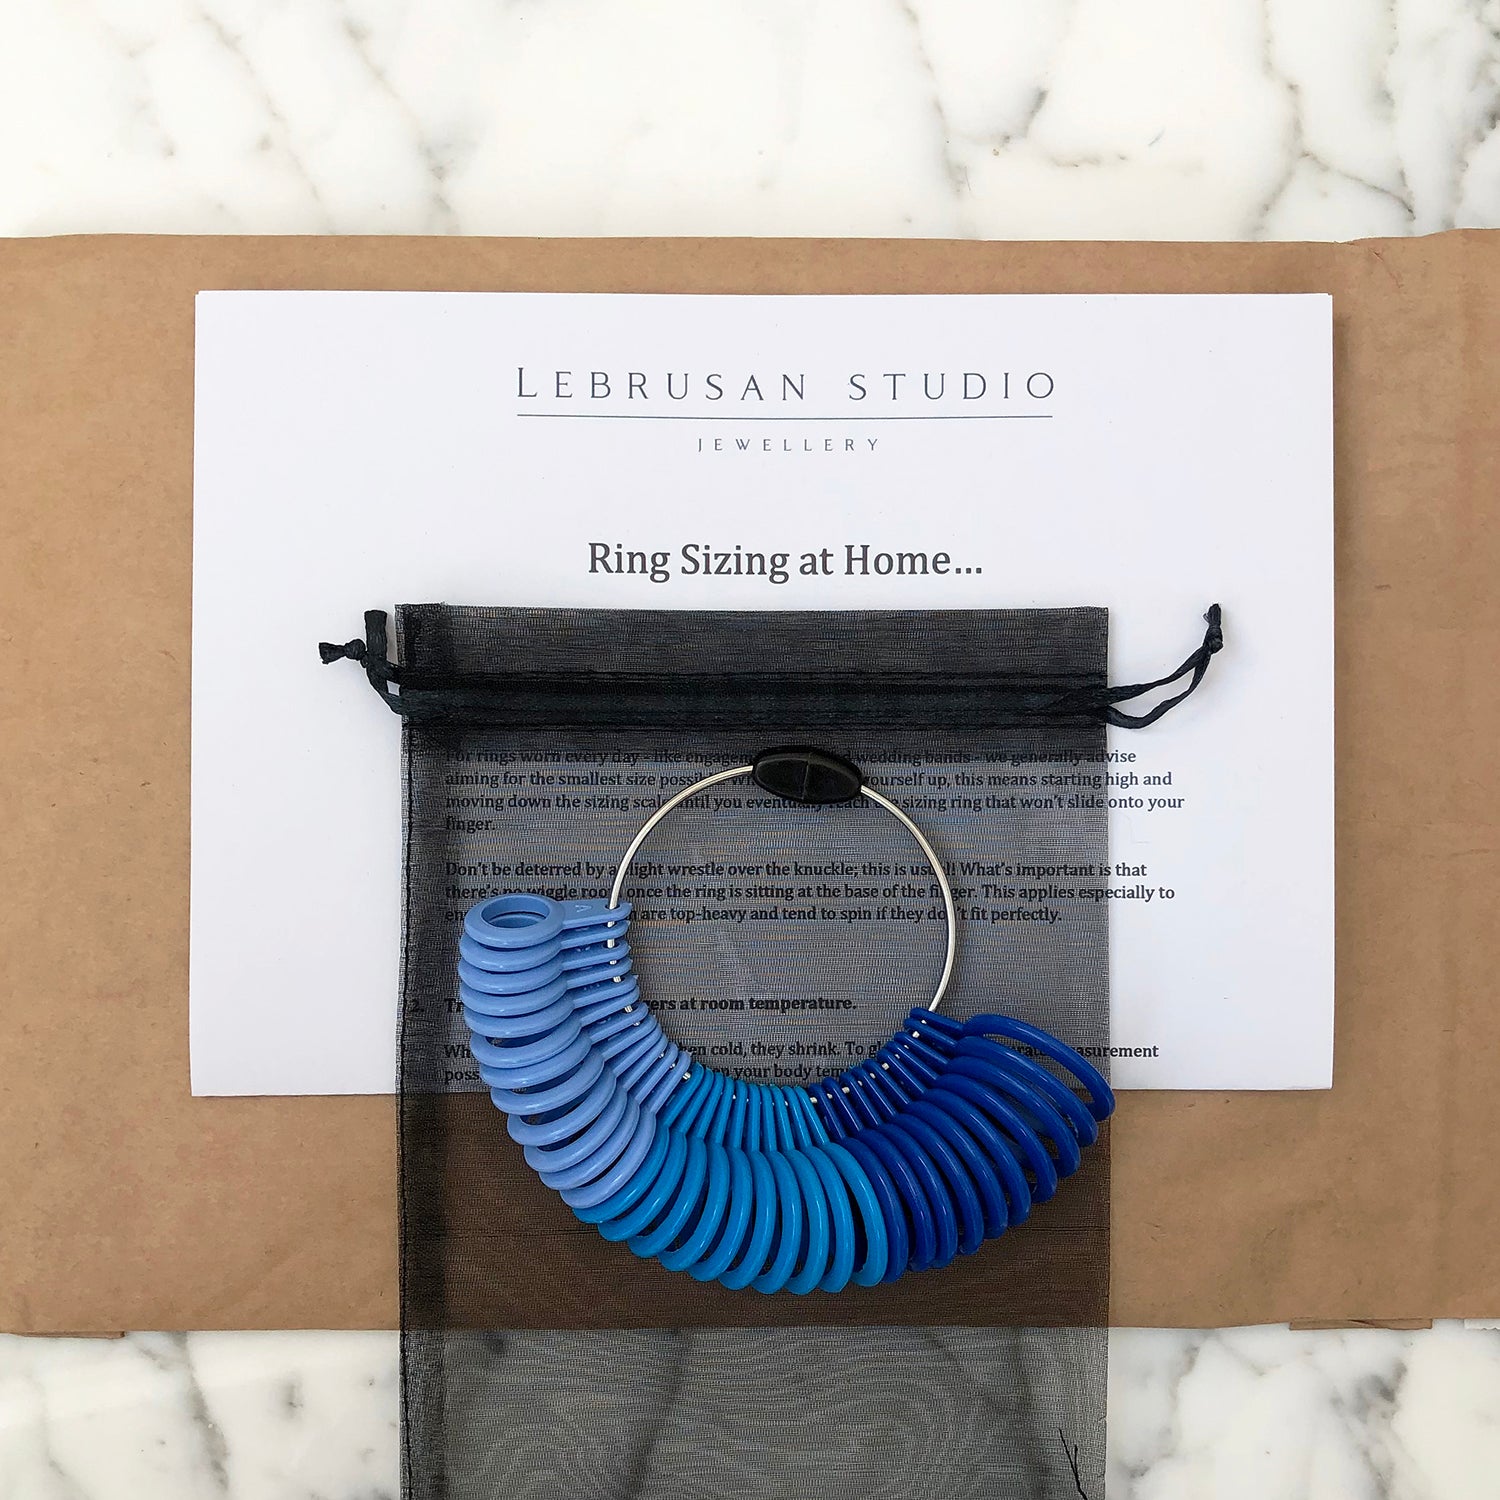 A Lebrusan Studio ring sizer loan for ensuring the perfect engagement ring or wedding band fit. A home ring sizing gauge is packaged up in an eco-friendly envelope with helpful jewellery sizing tips. 